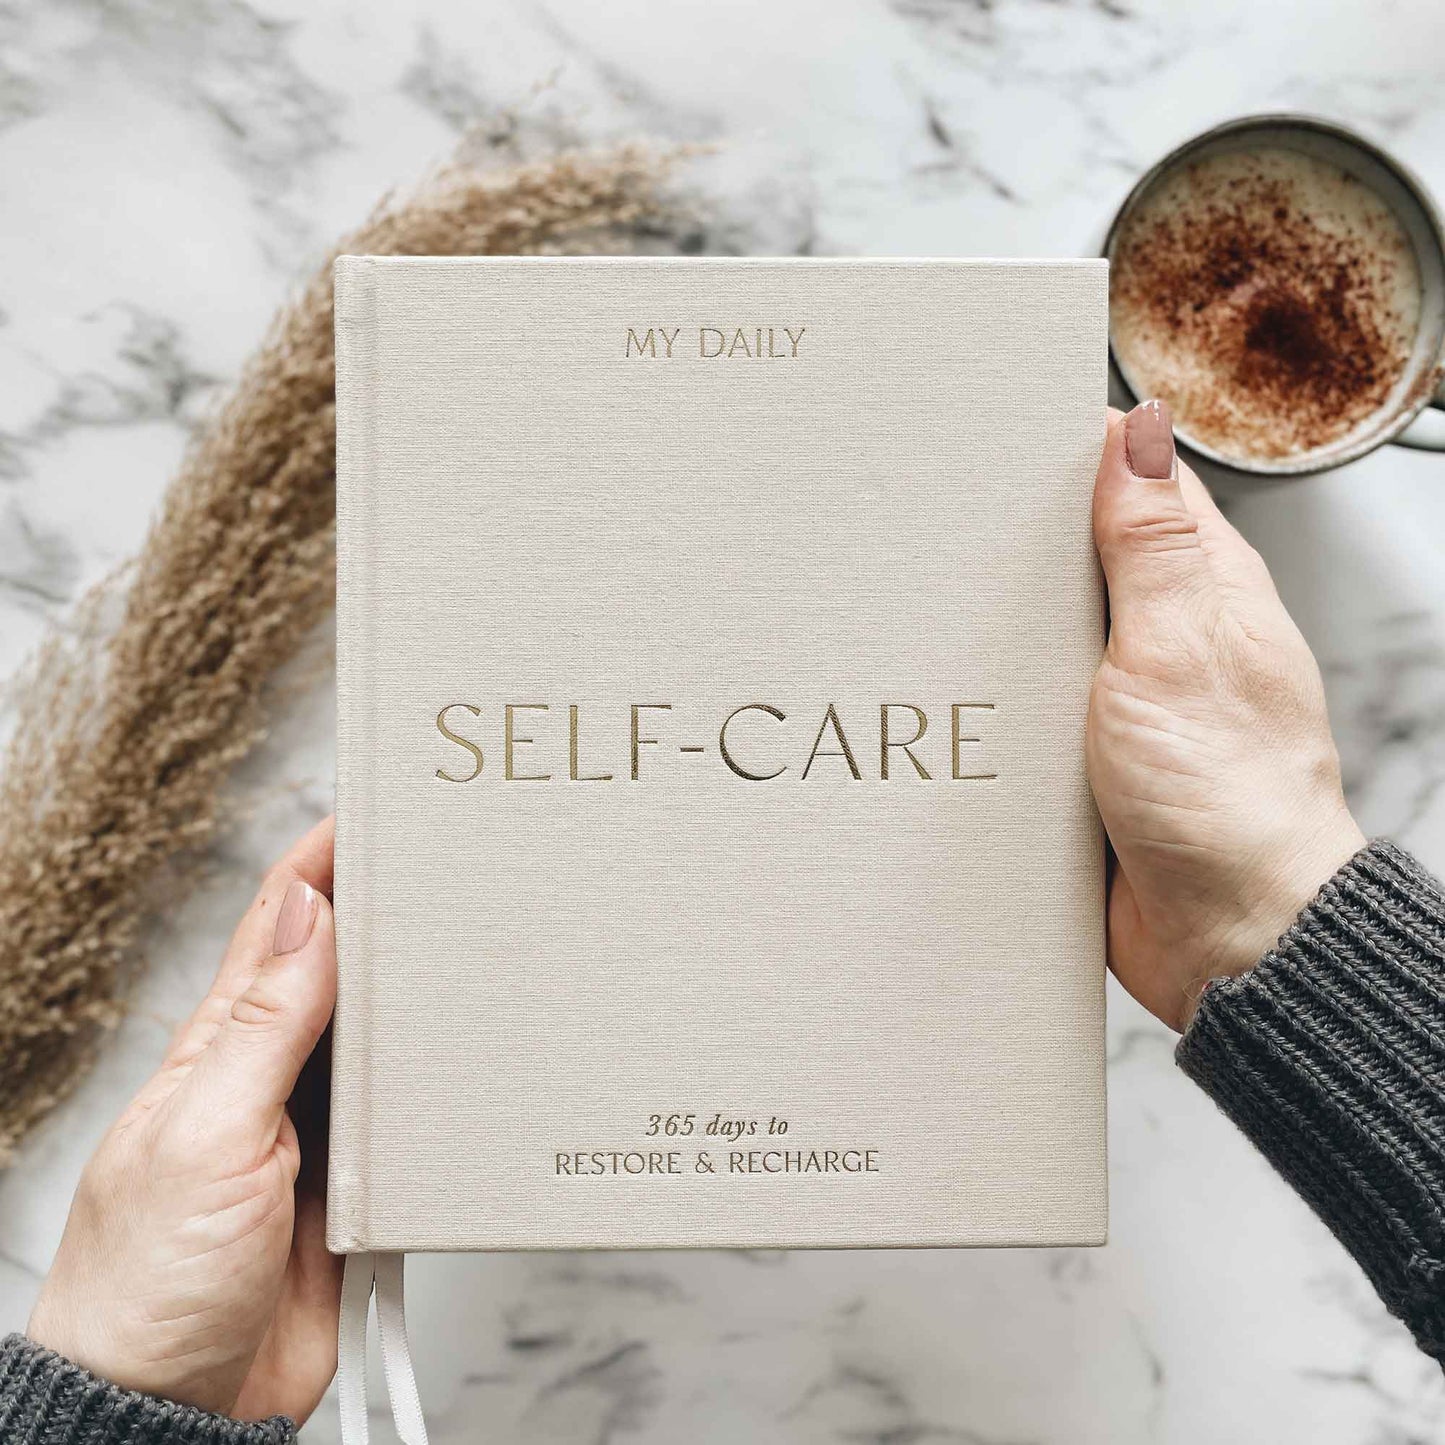 My Daily Self-Care (Almond) reflection and gratitude journal